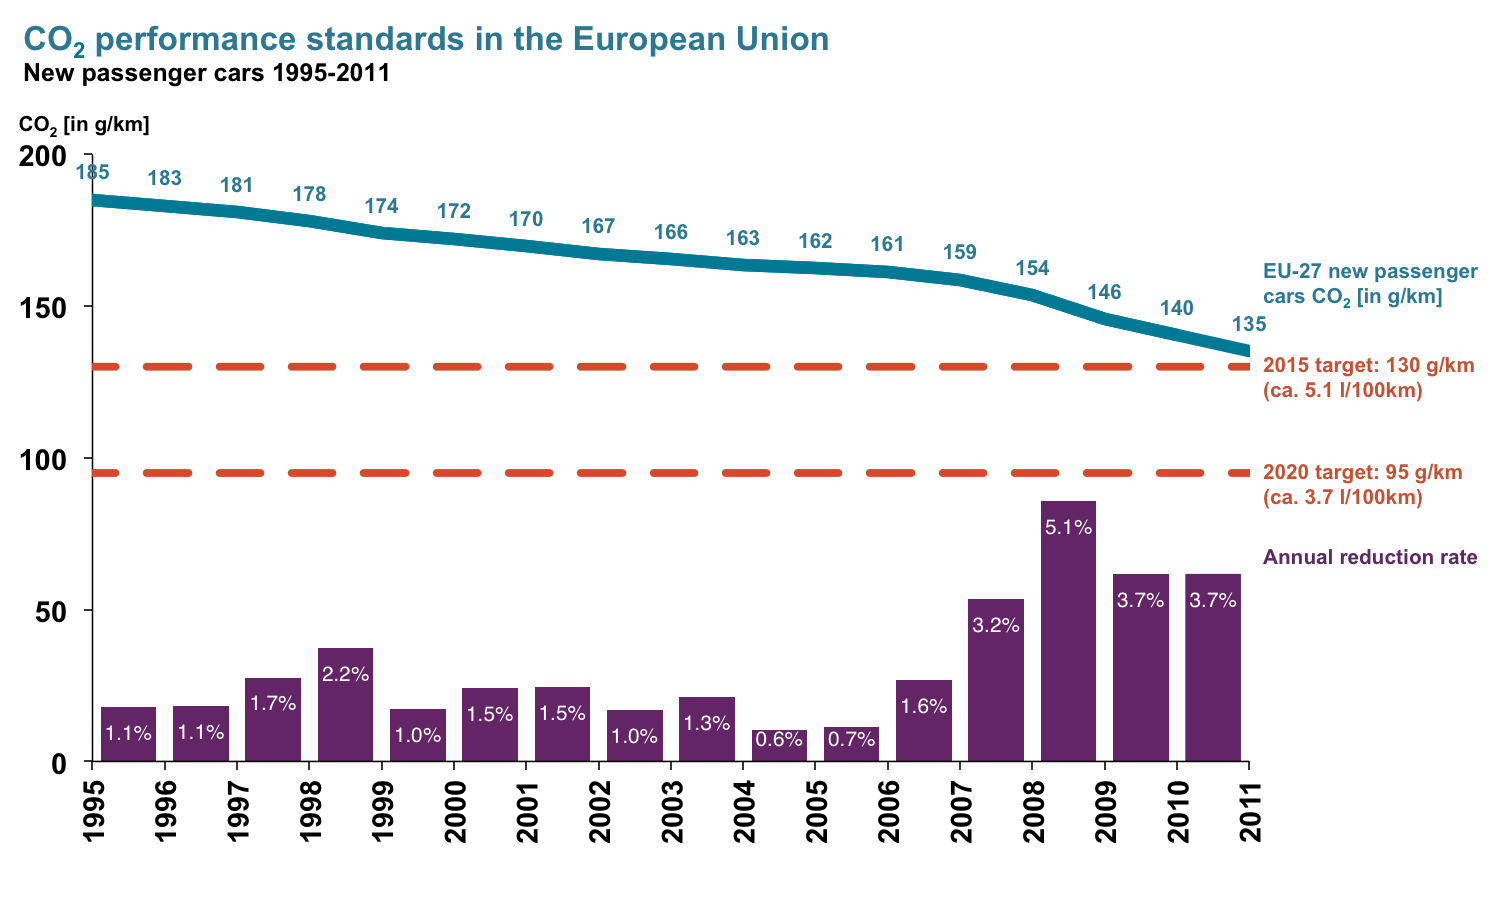 CO2 performance standards in the EU